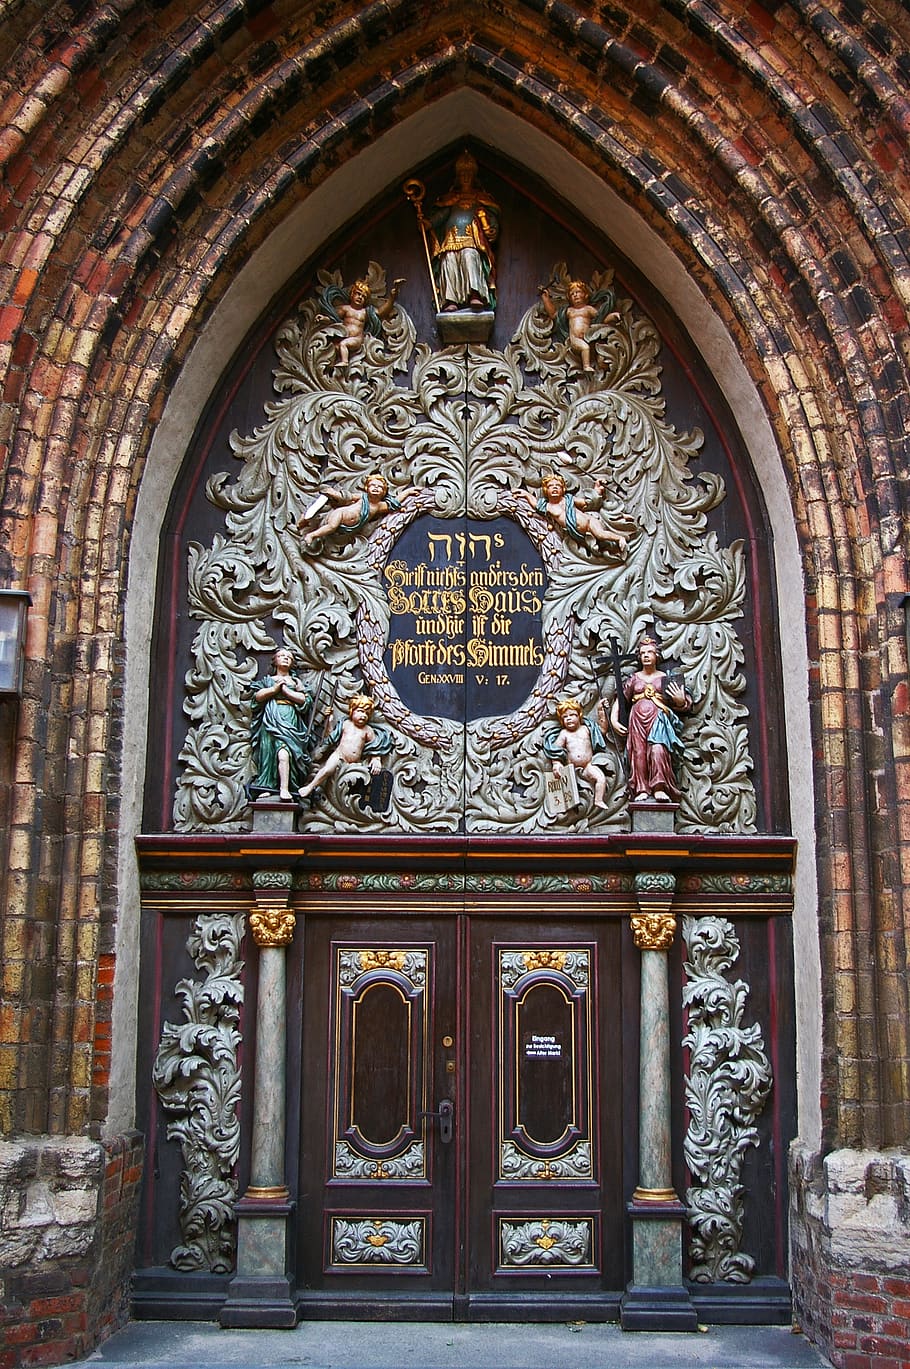 nikolai church in stralsund, input, churches entrance, church, architecture, historically, portal, ornament, old, door opening